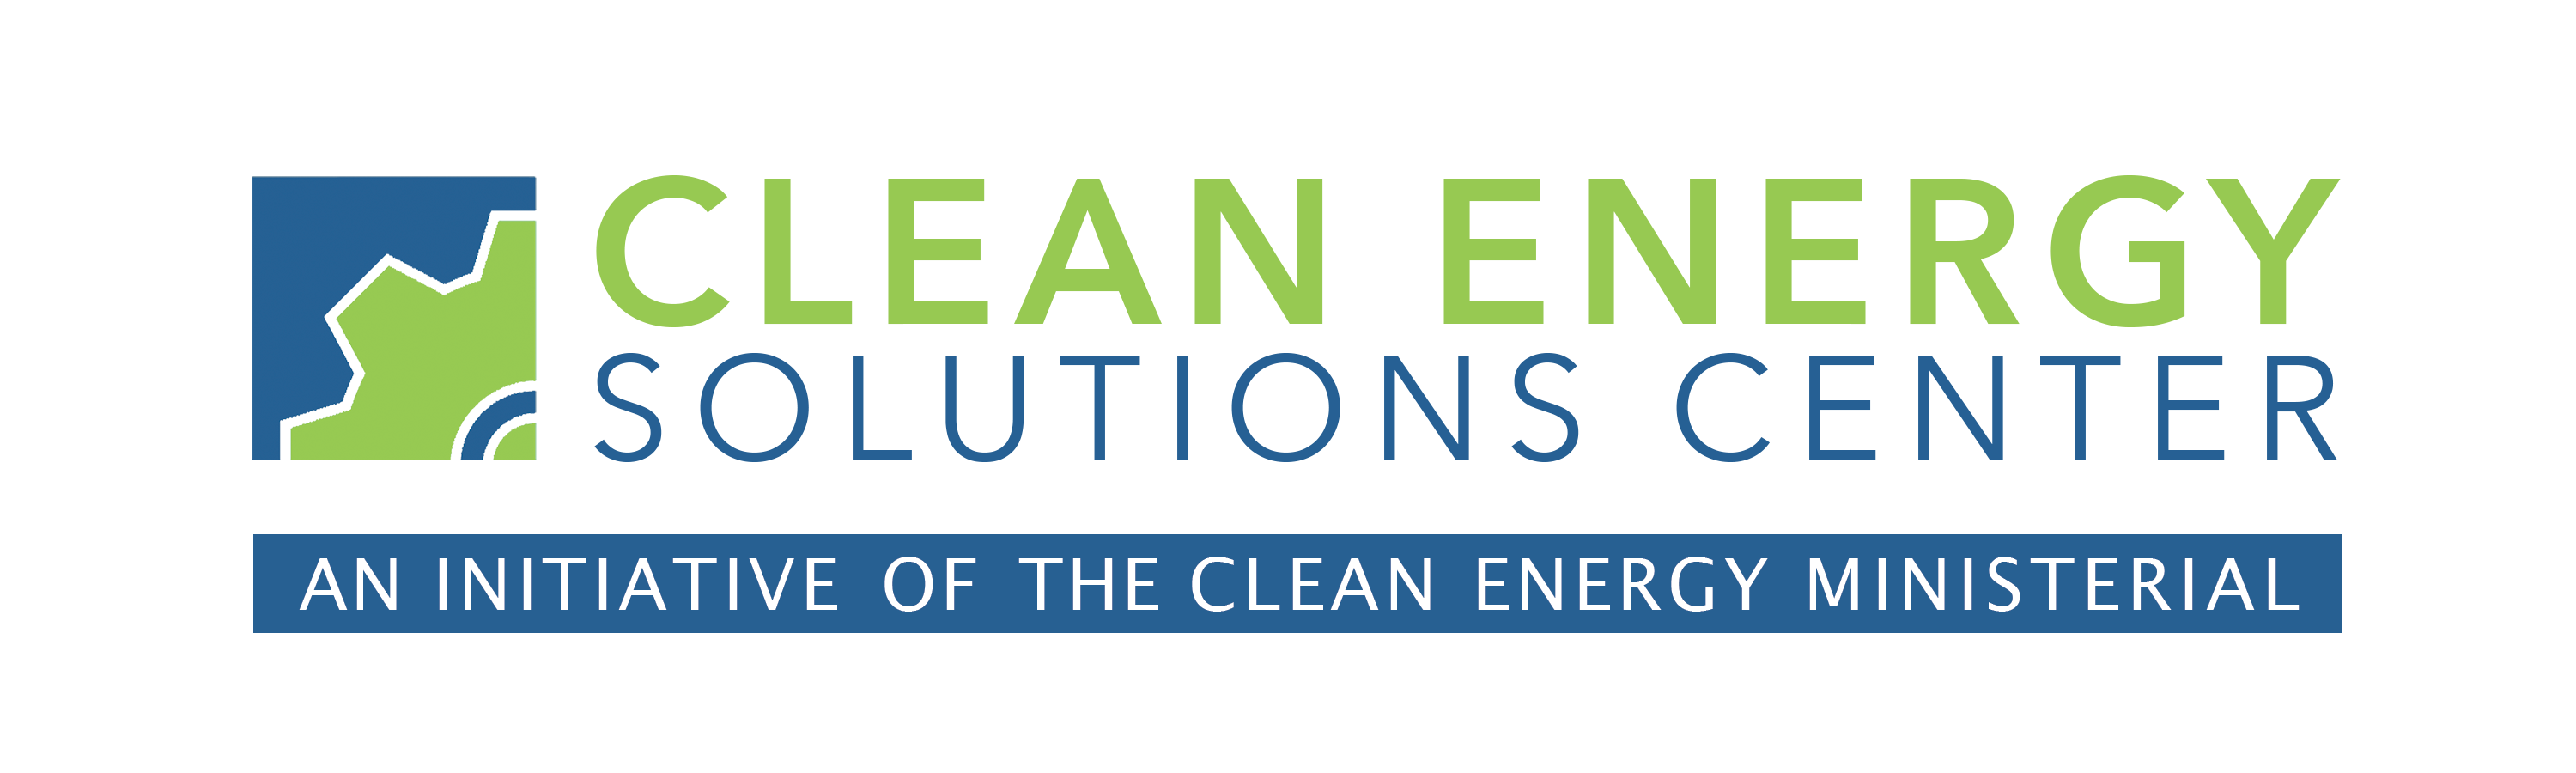 Clean Energy Solutions Center